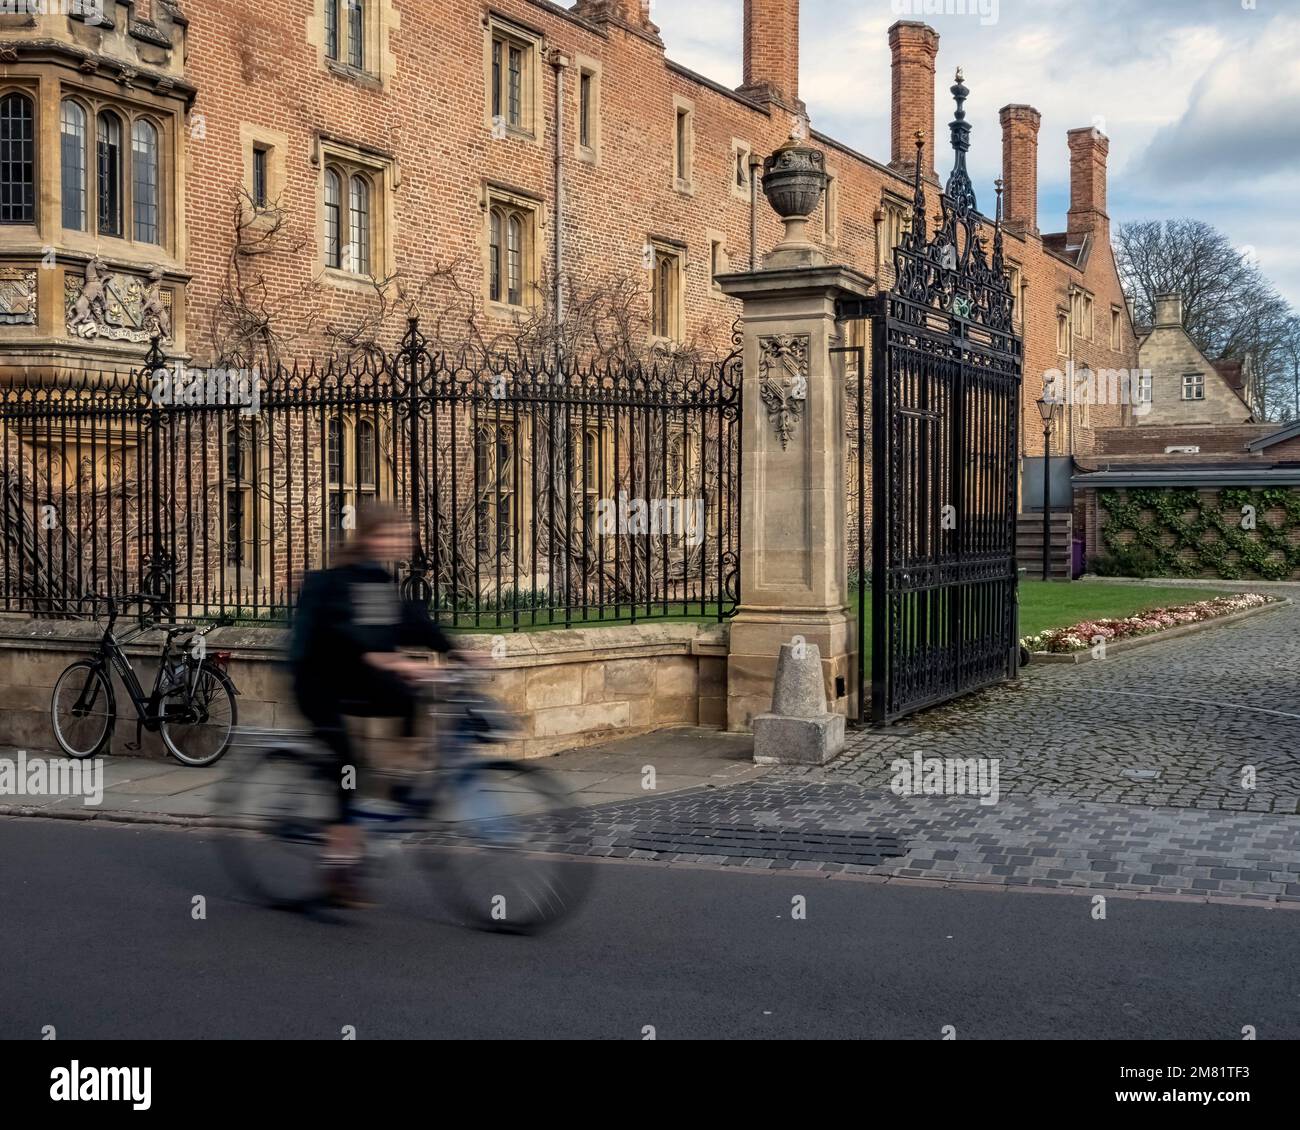 CAMBRIDGE, UK - MARCH 11, 2020: Cyclist passing Magdalene College building with motion blur Stock Photo